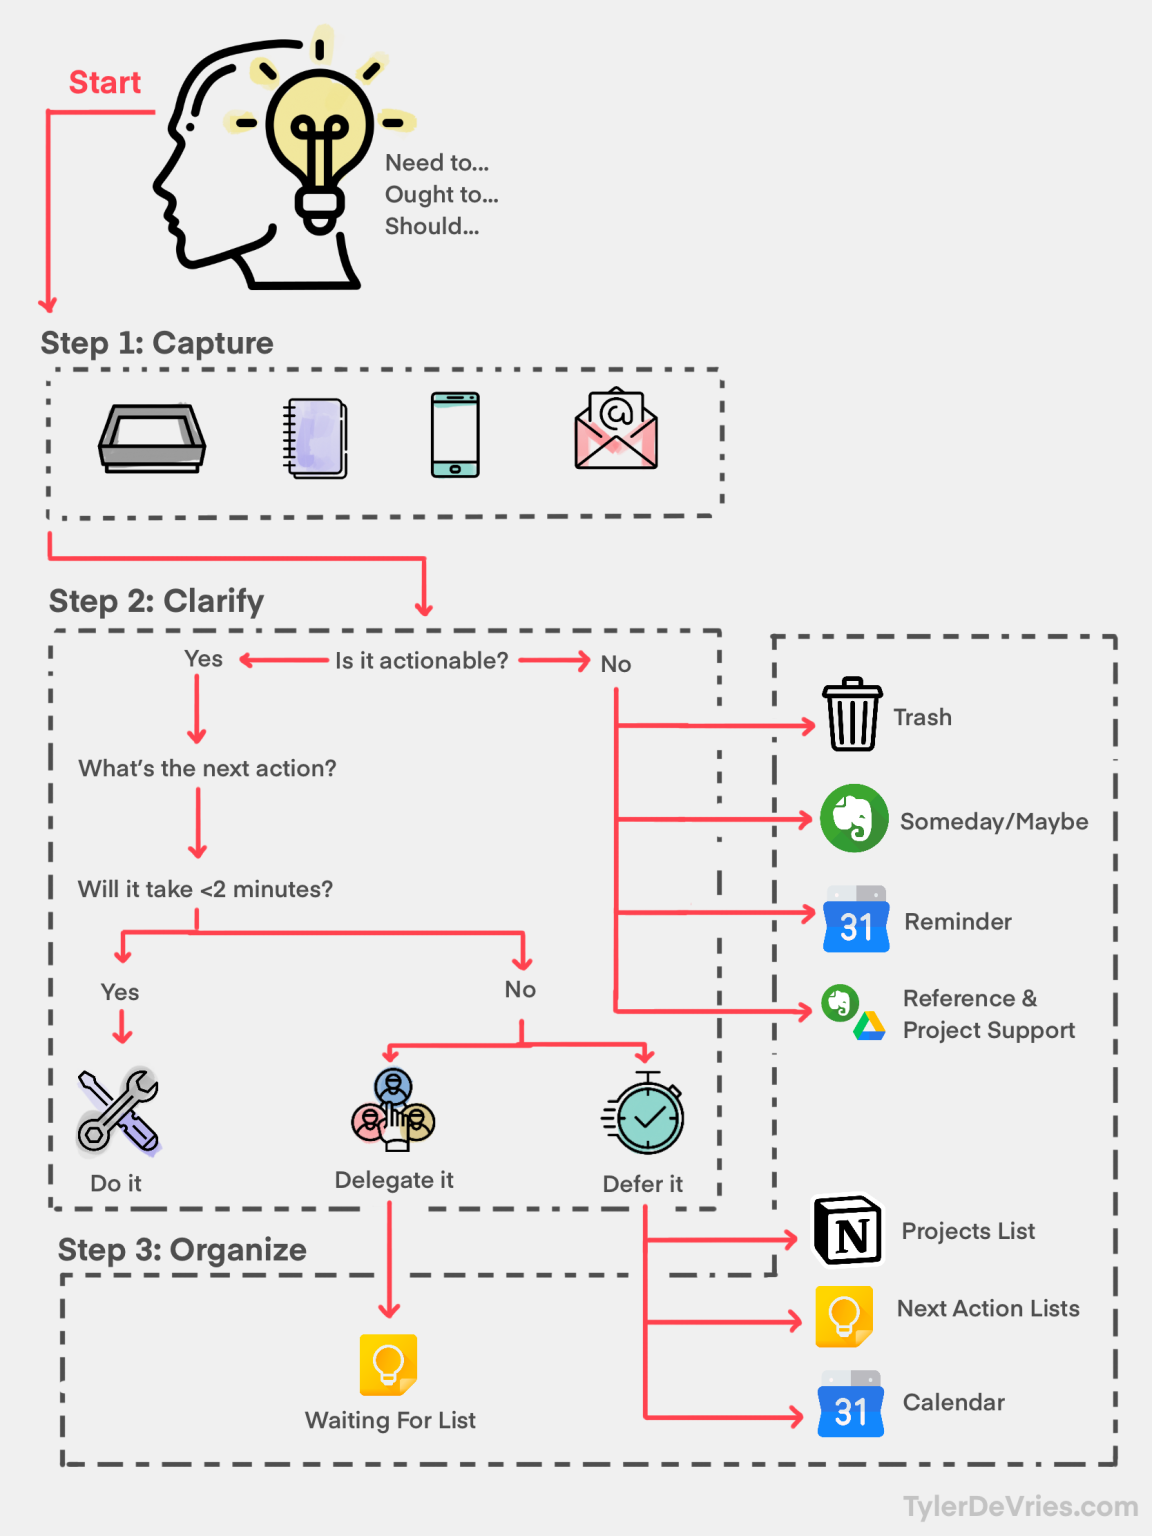 Overview of the workflow